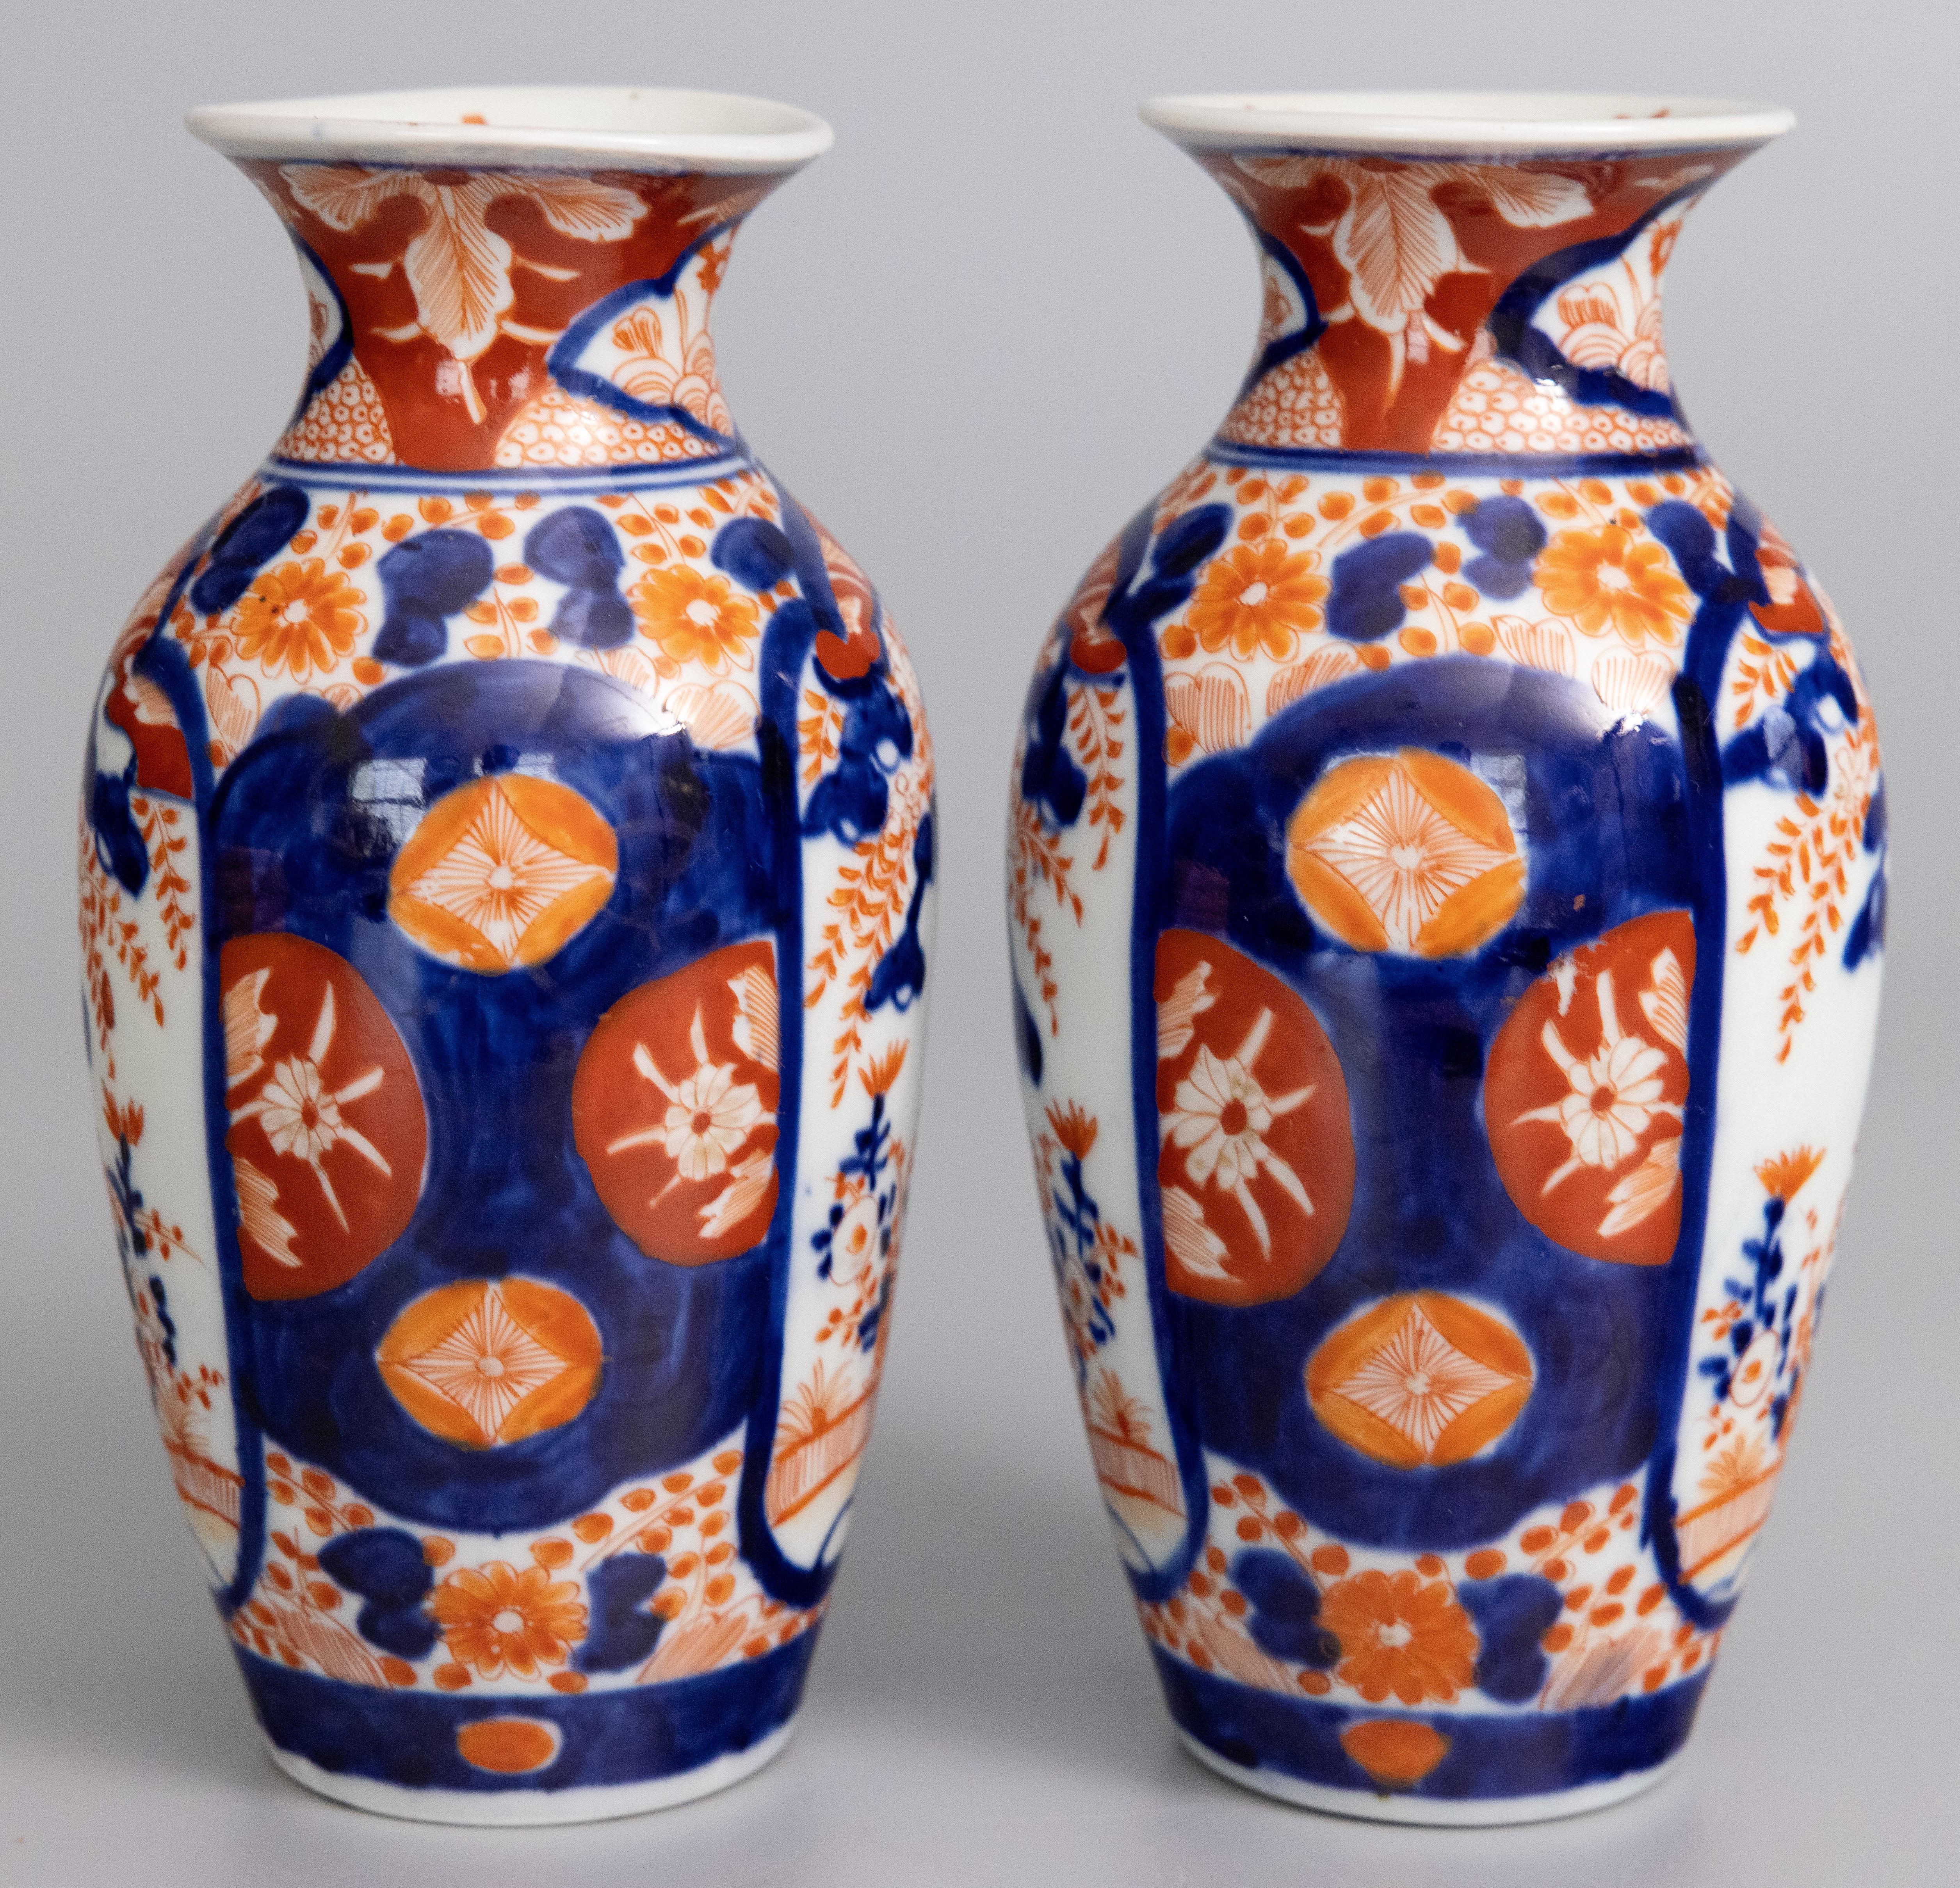 A handsome pair of 19th-Century Japanese Imari porcelain vases. These fine vases have a lovely shape and hand painted floral designs in the traditional Imari colors. 